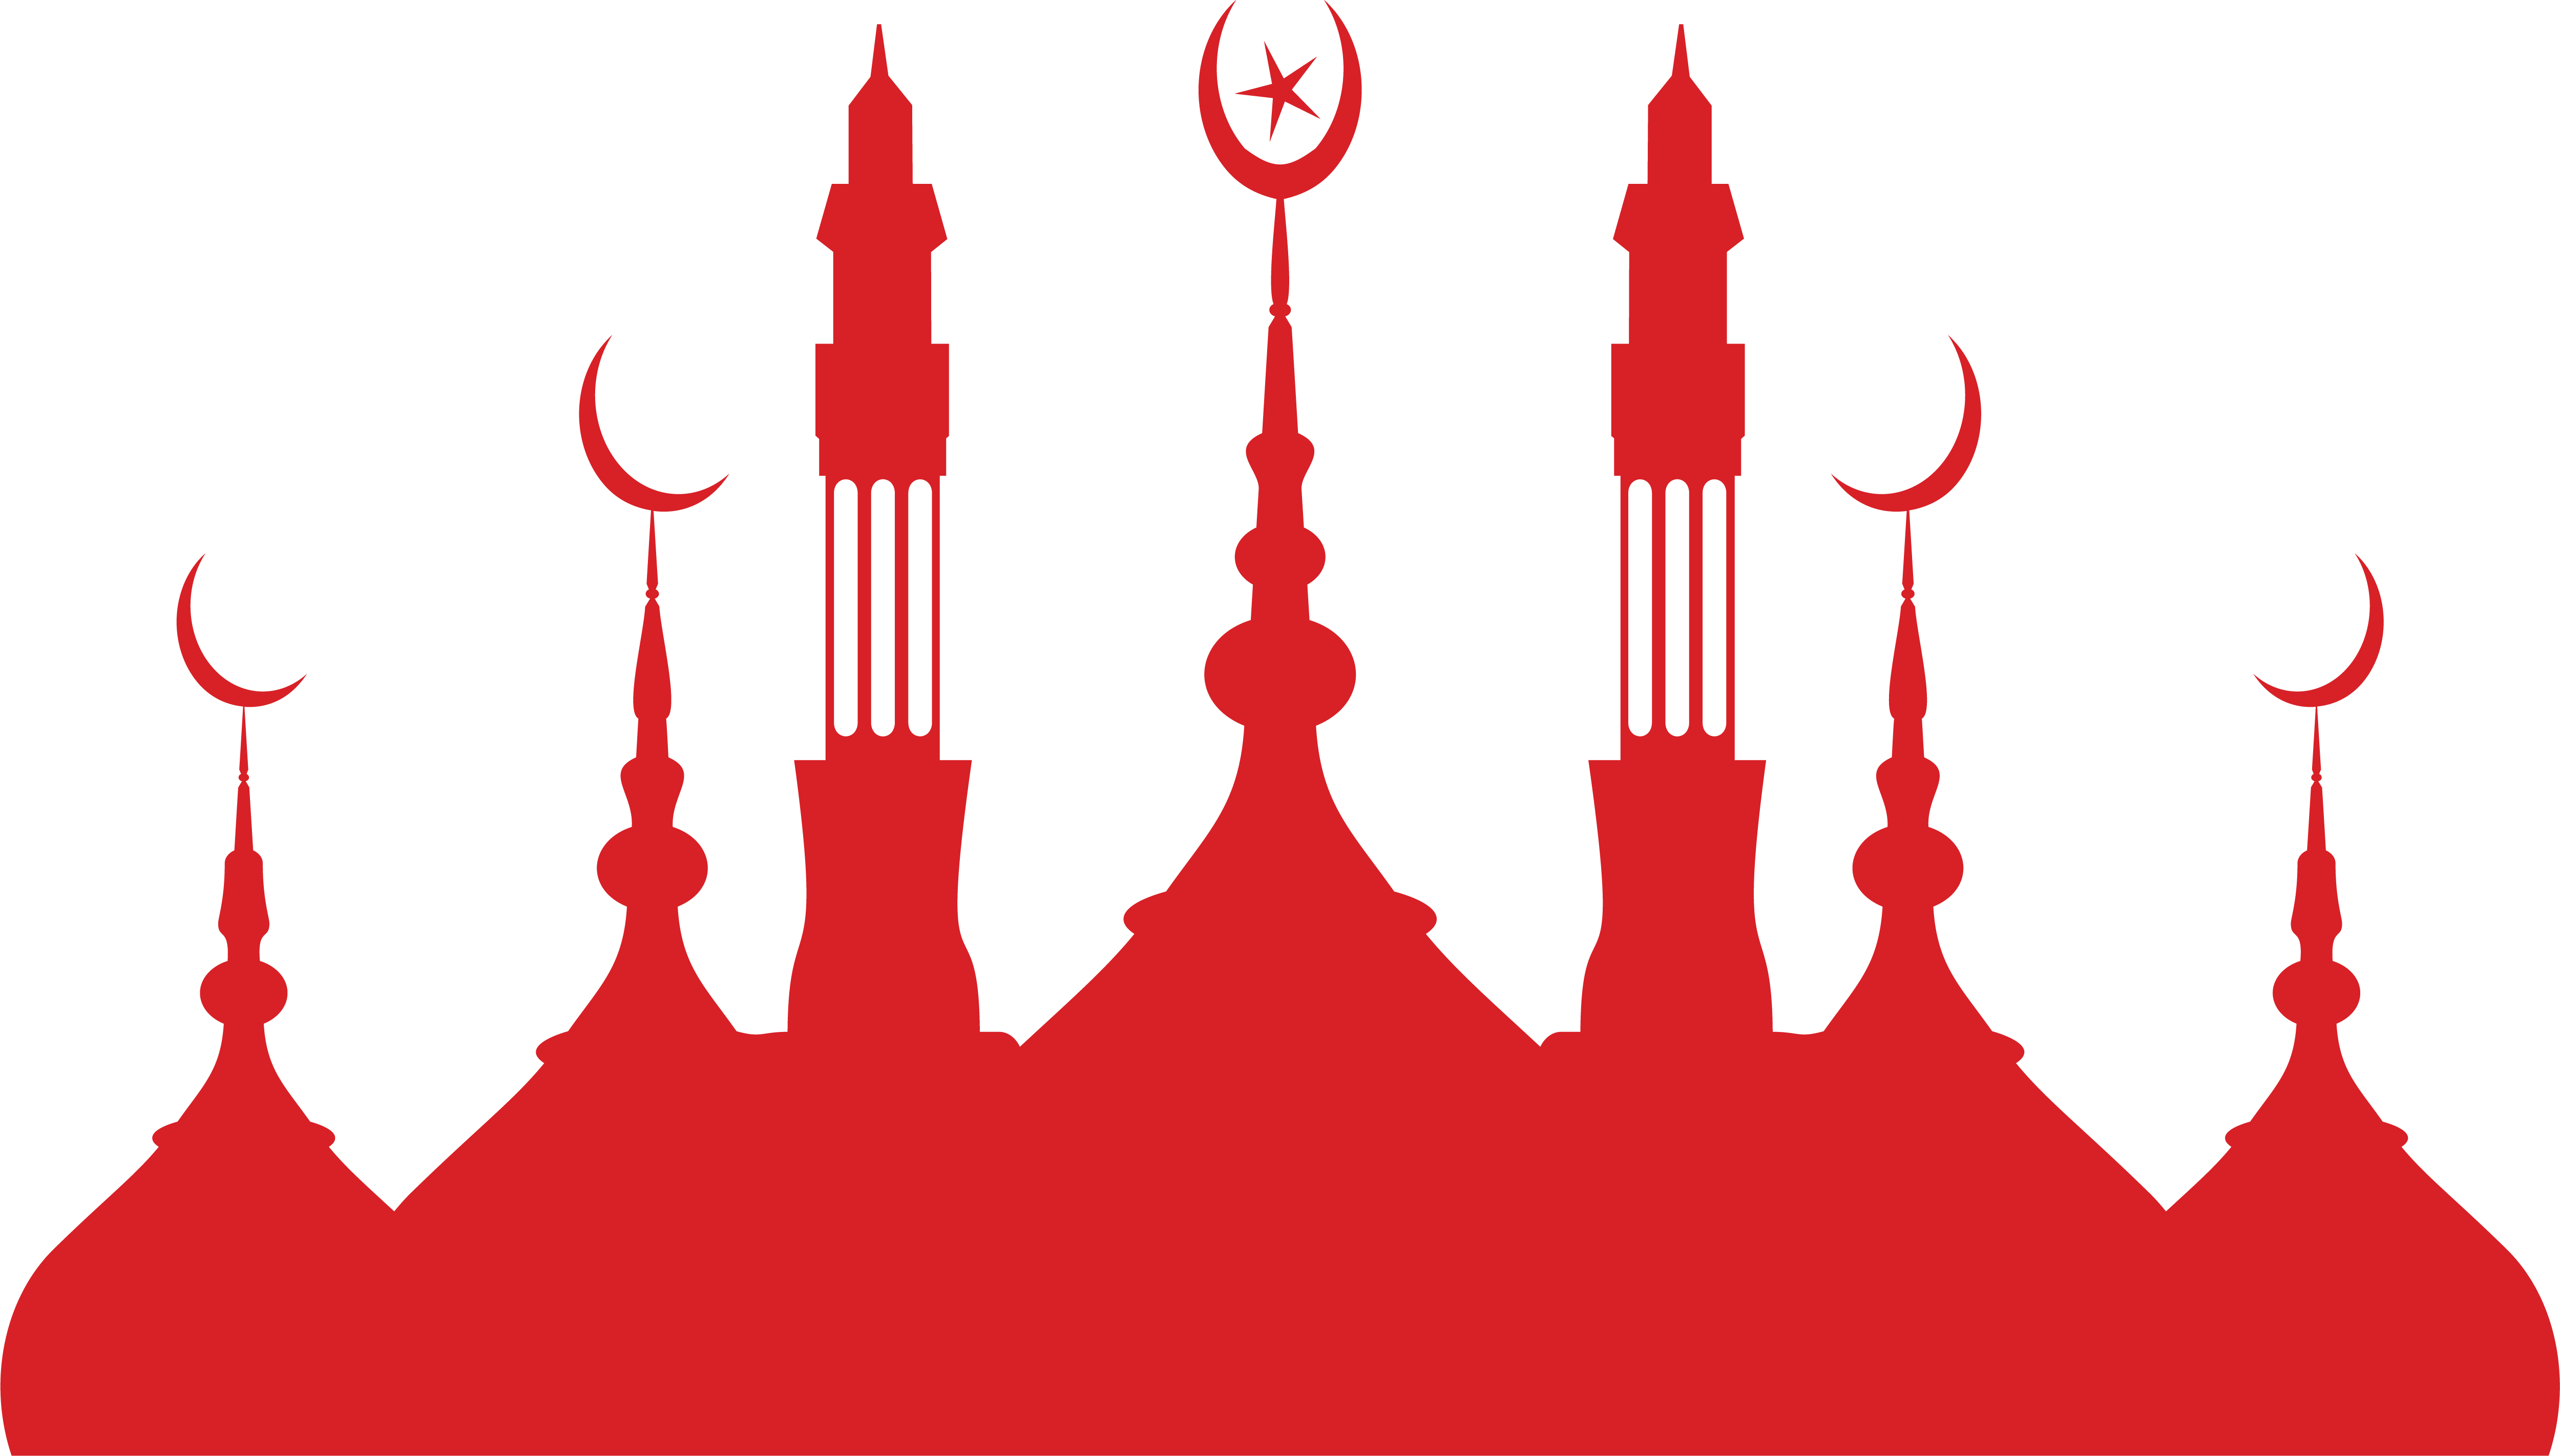 Mosque Silhouette Islamic Architecture Red Islamic Church Png Download 4998 2843 Free Transparent Mosque Png Download Clip Art Library